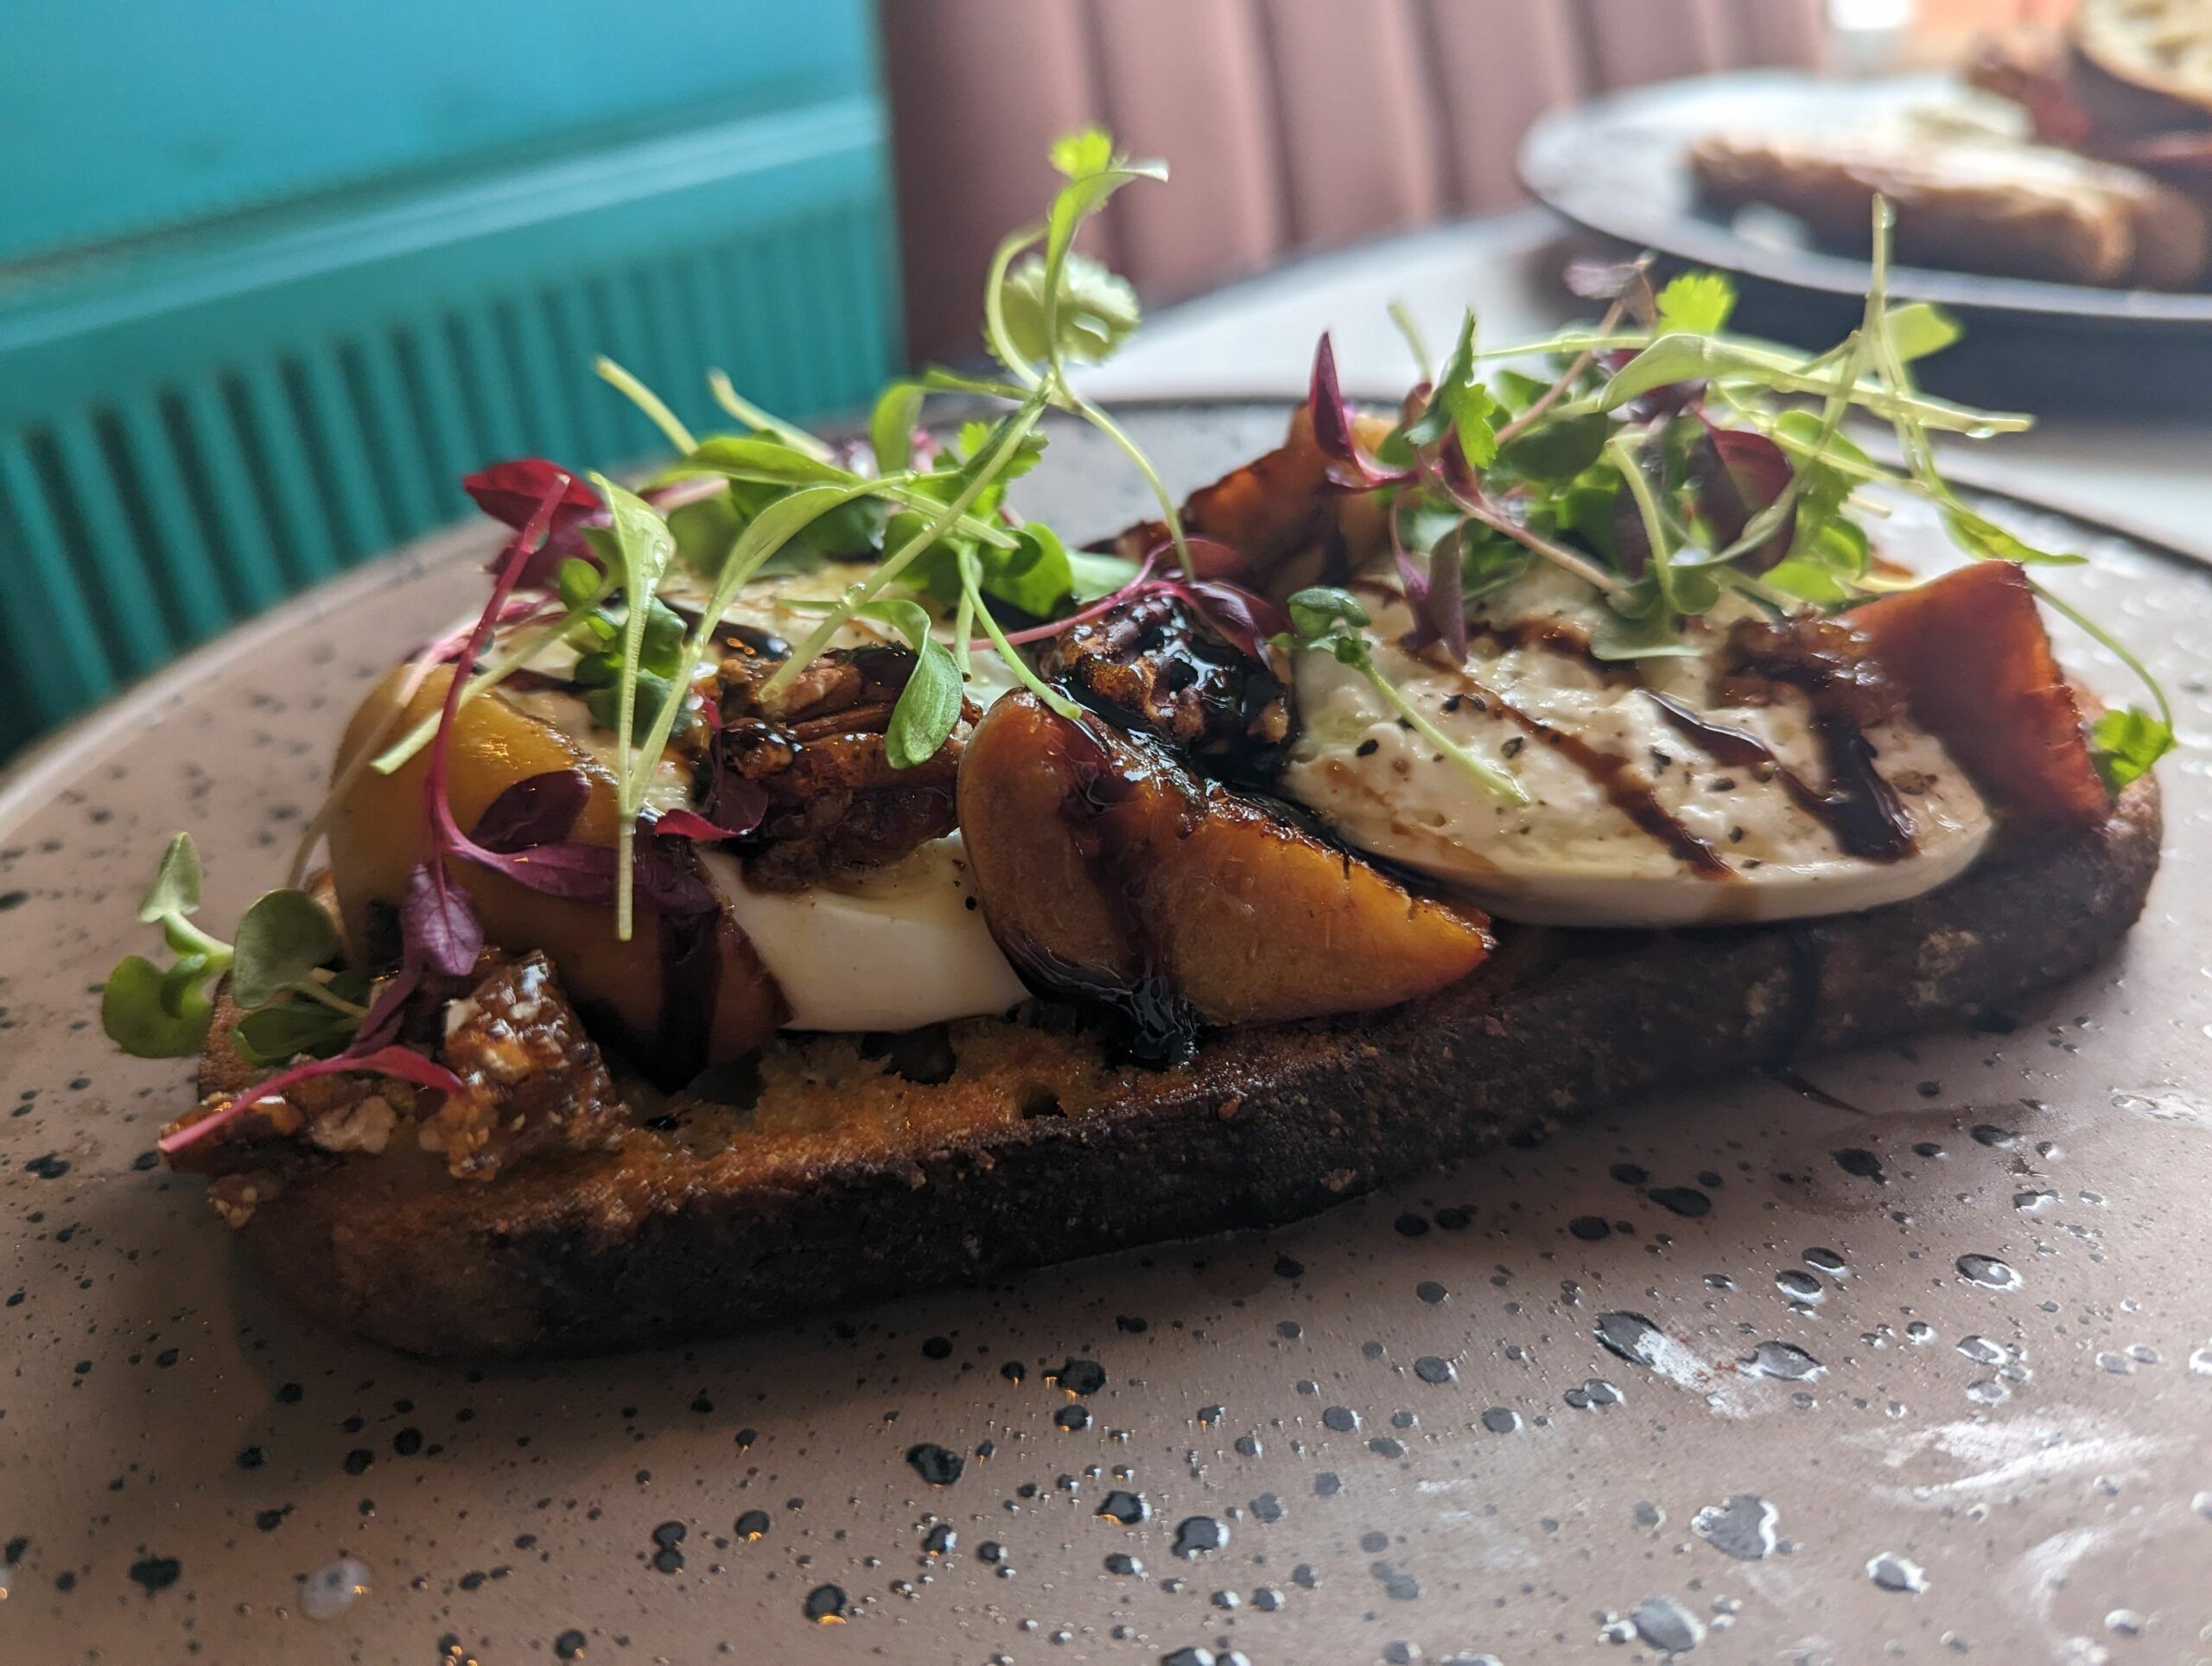  A thick slice of very good sourdough came topped with soft, cool, white Burrata, little chunks of roasted peach and walnuts. Brunch Seven Dials